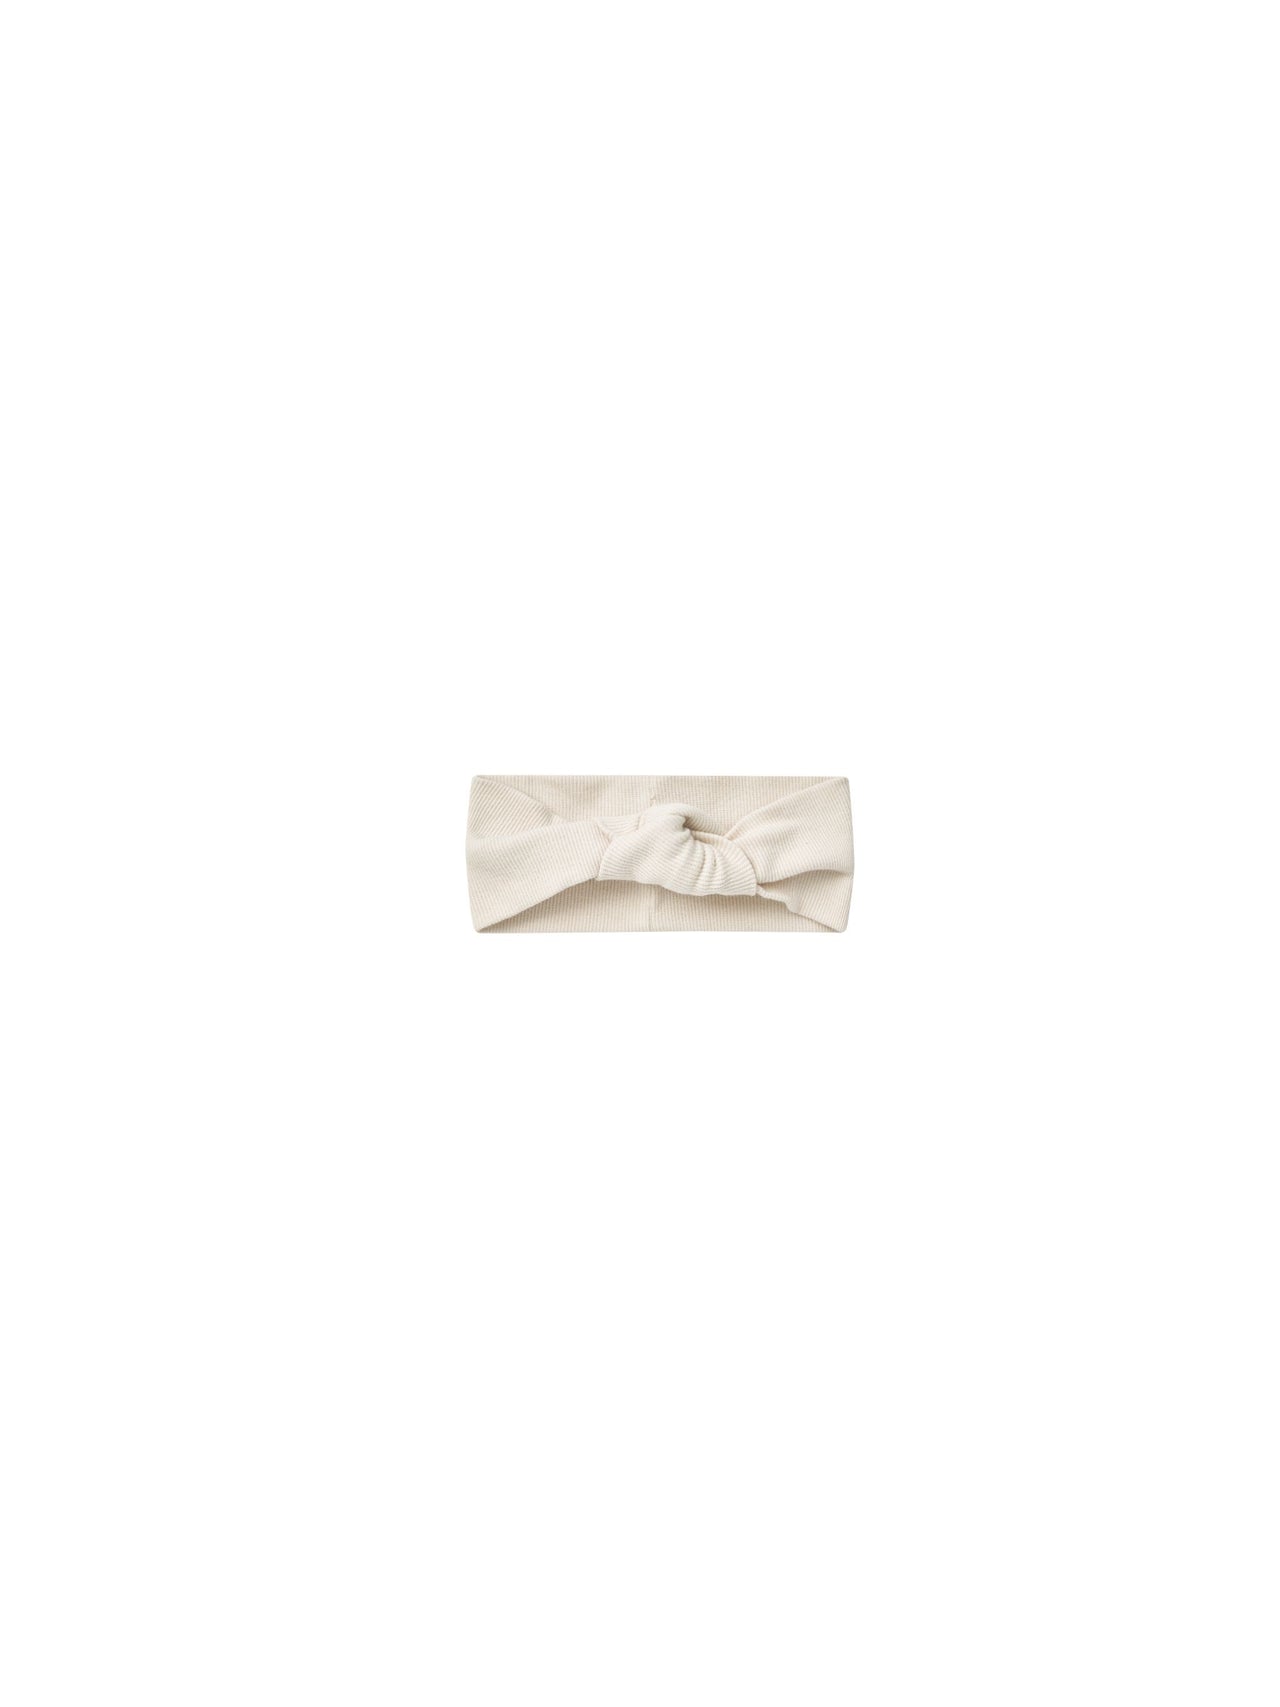 Quincy Mae Ribbed Knotted Headband, Natural